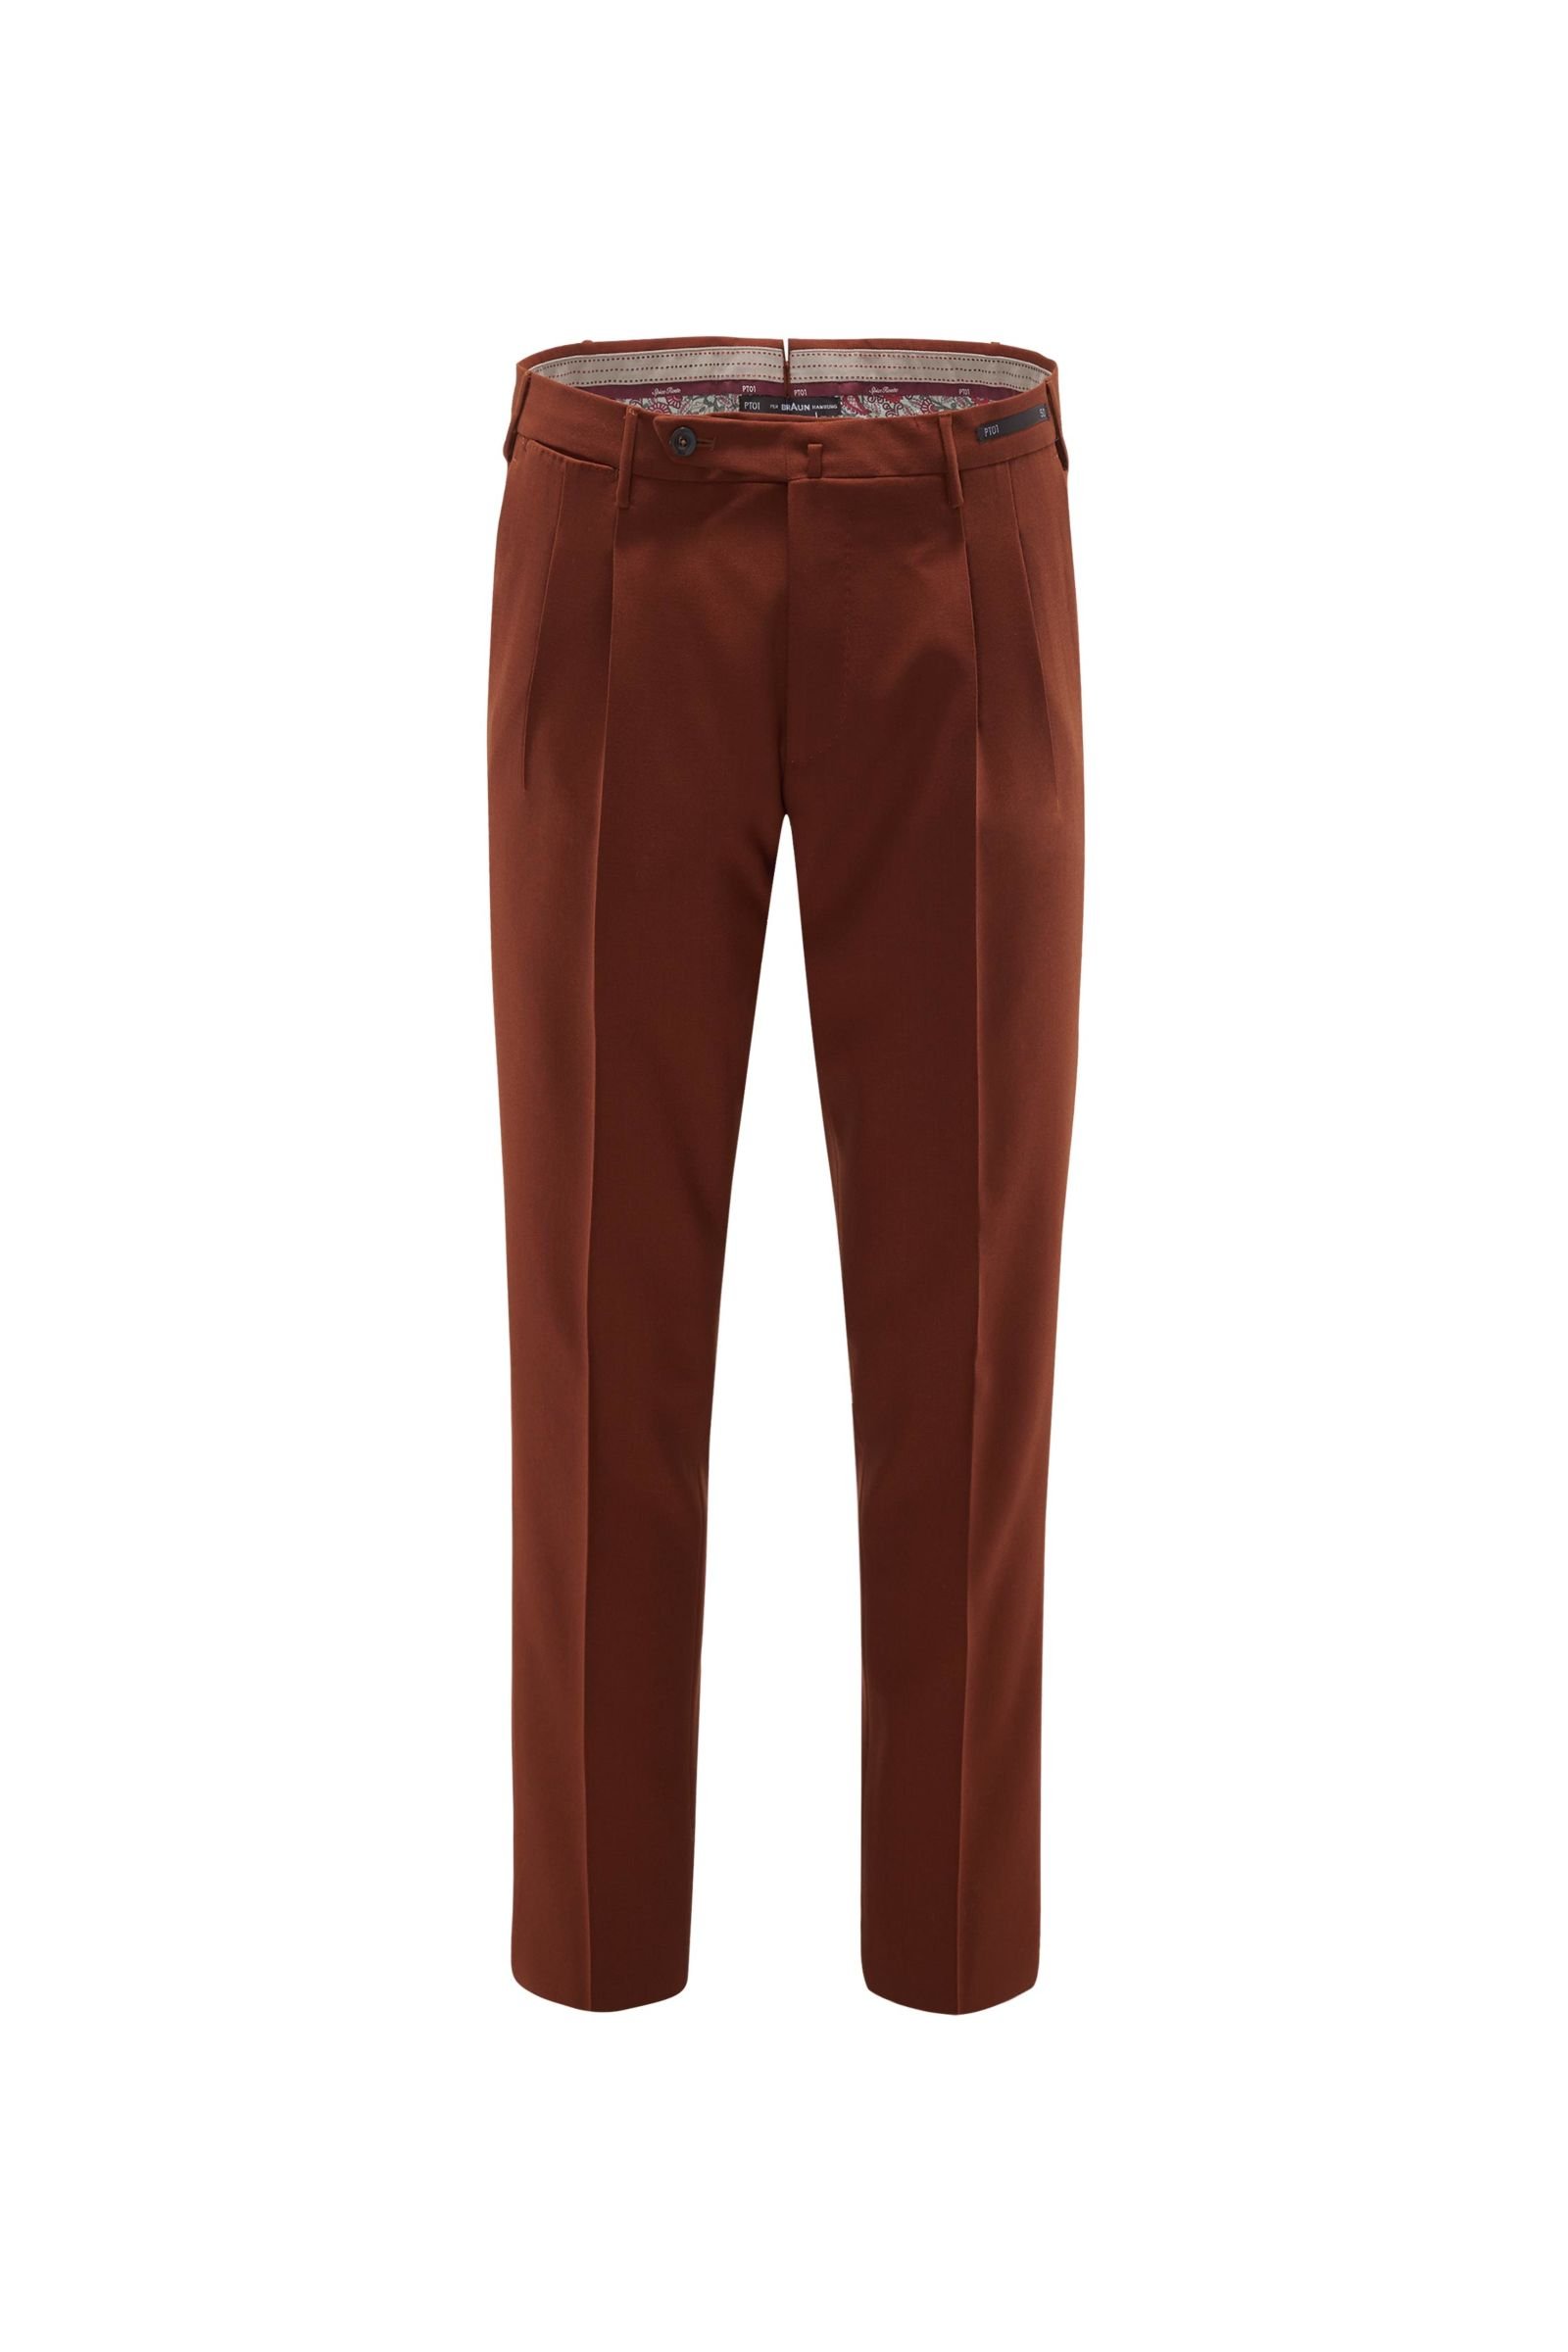 Wool trousers 'Spice Route Preppy Fit' red-brown